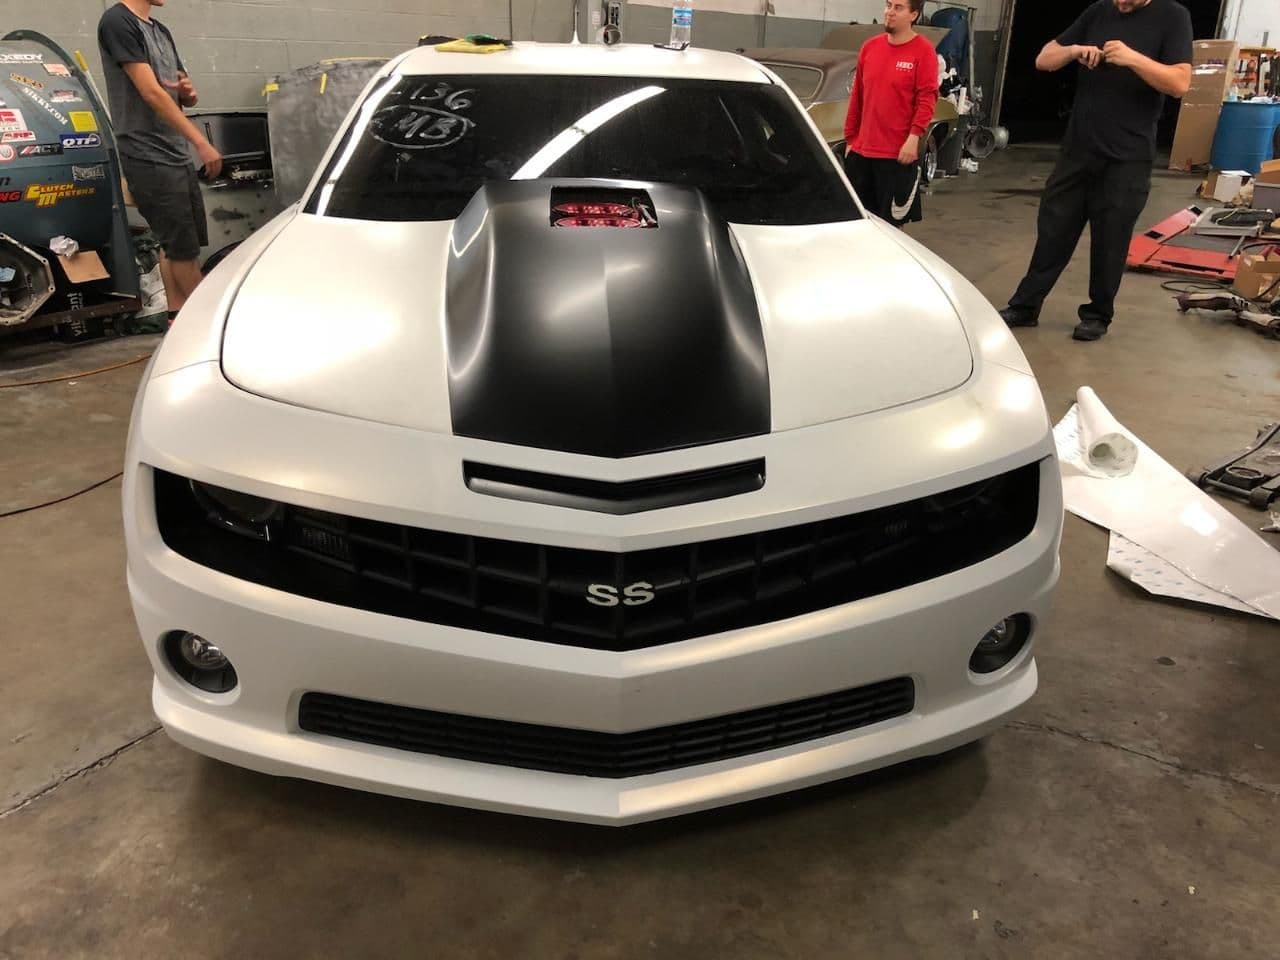 2011 Chevrolet Camaro - 2011 Camaro SS 427 LSx/ TH400/ Holley EFI/ Weld/ Nitrous Etc.. - Used - VIN 2G1Ft1ew3b9137696 - 7,700 Miles - 8 cyl - 2WD - Automatic - Coupe - Black - Northbrook, IL 60062, United States